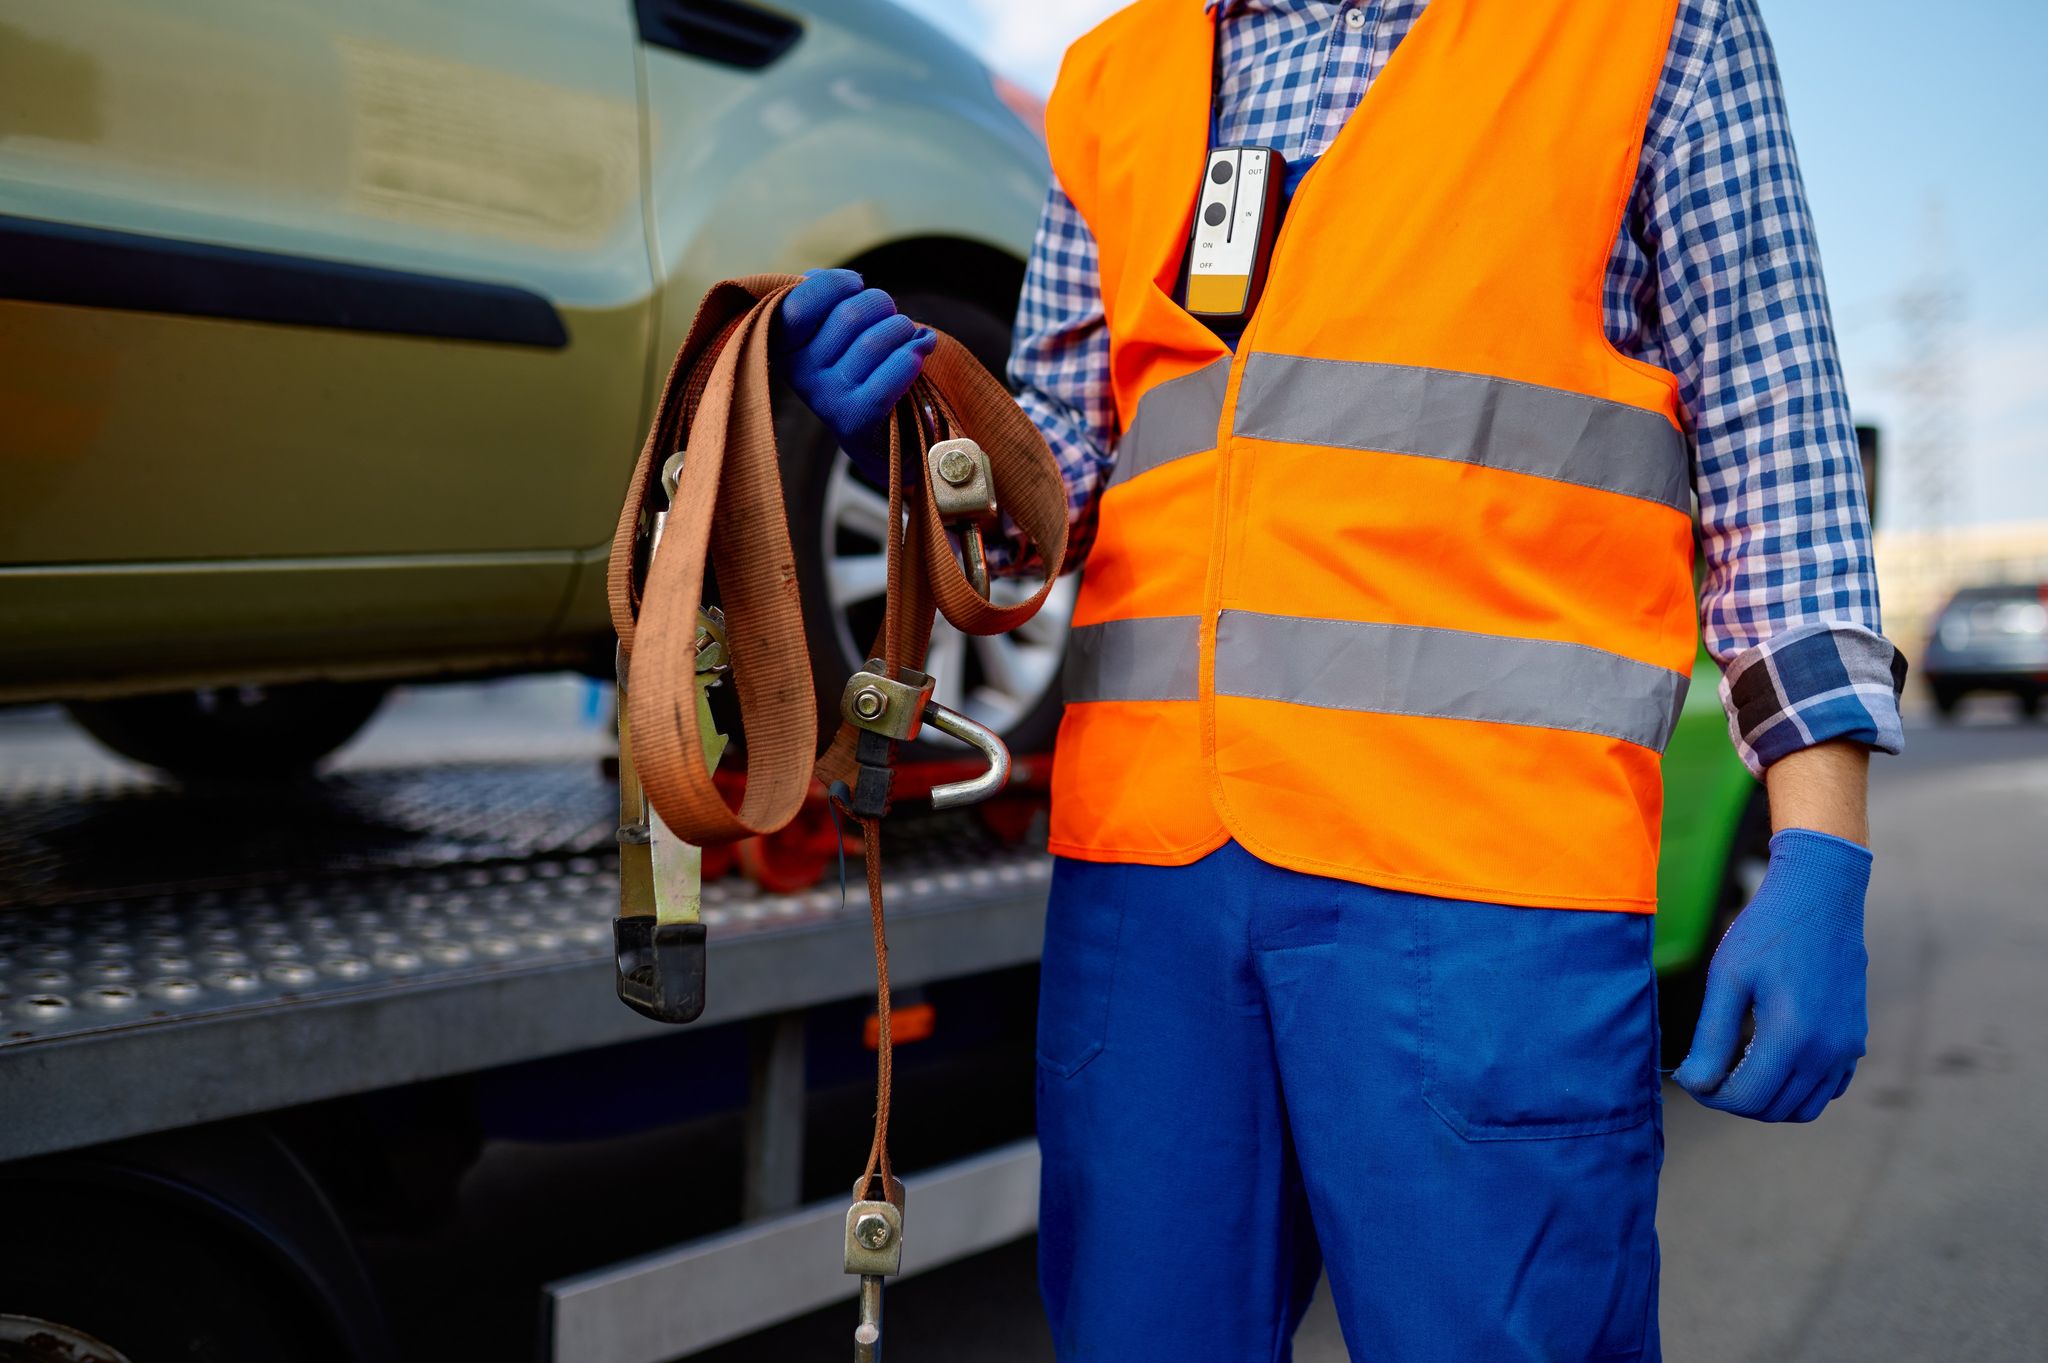 Male tow truck assistant holding belts for car fastening for safety transportation.